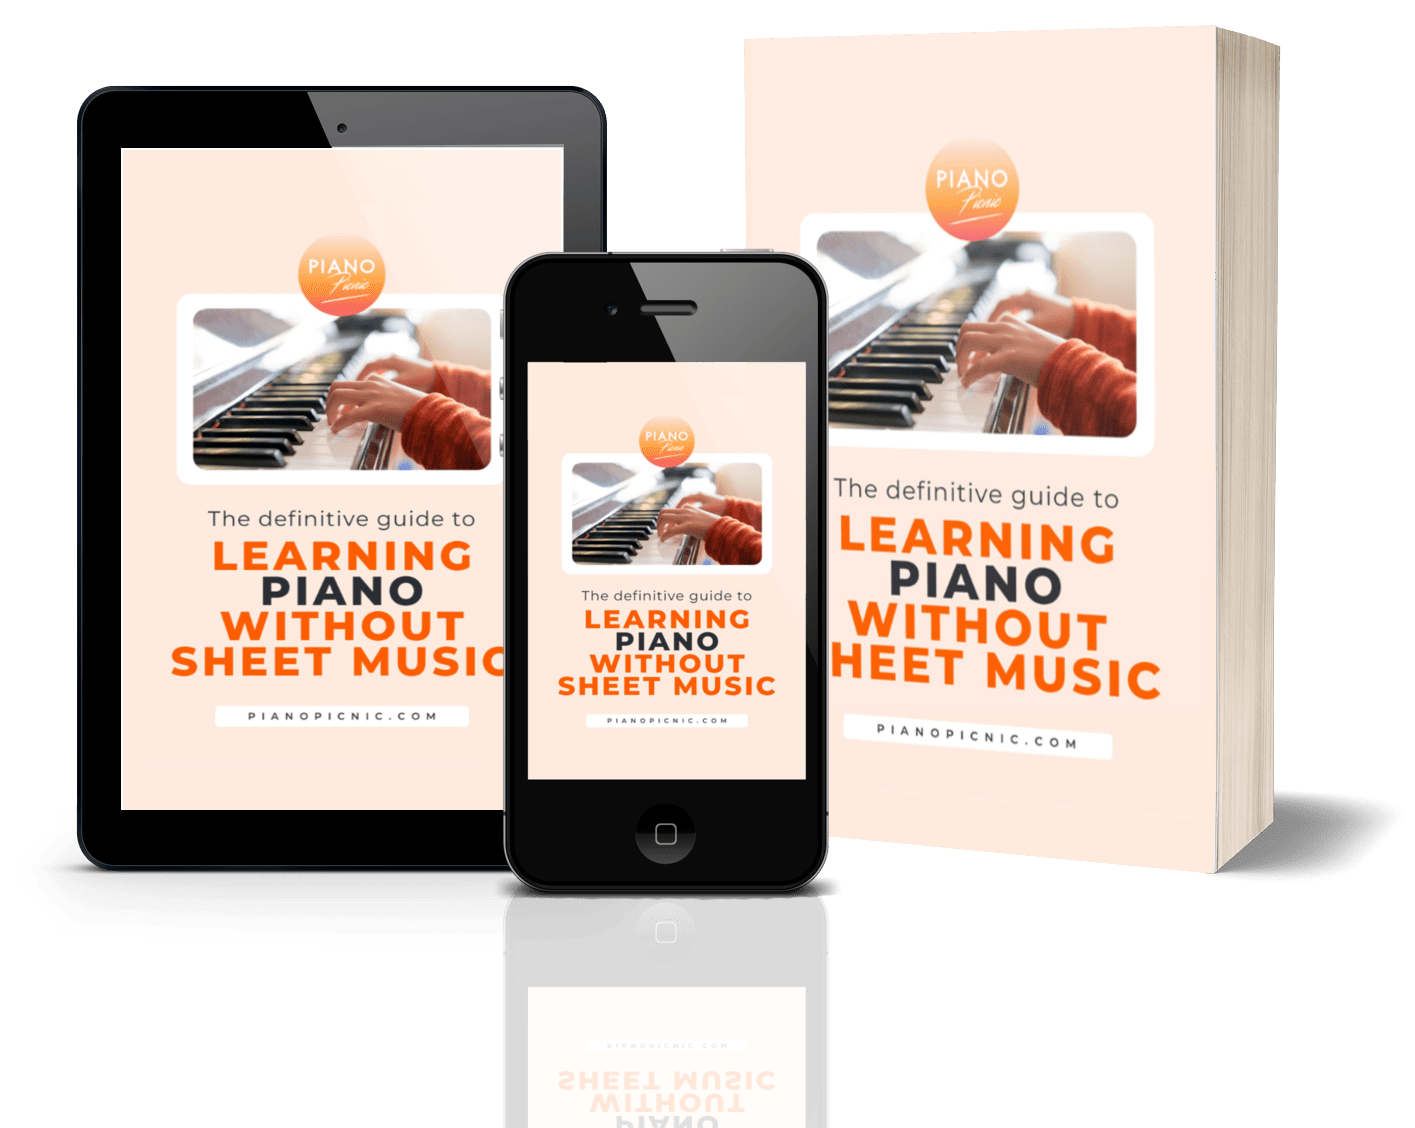 The Definitive Guide to Learning Piano without Sheet Music